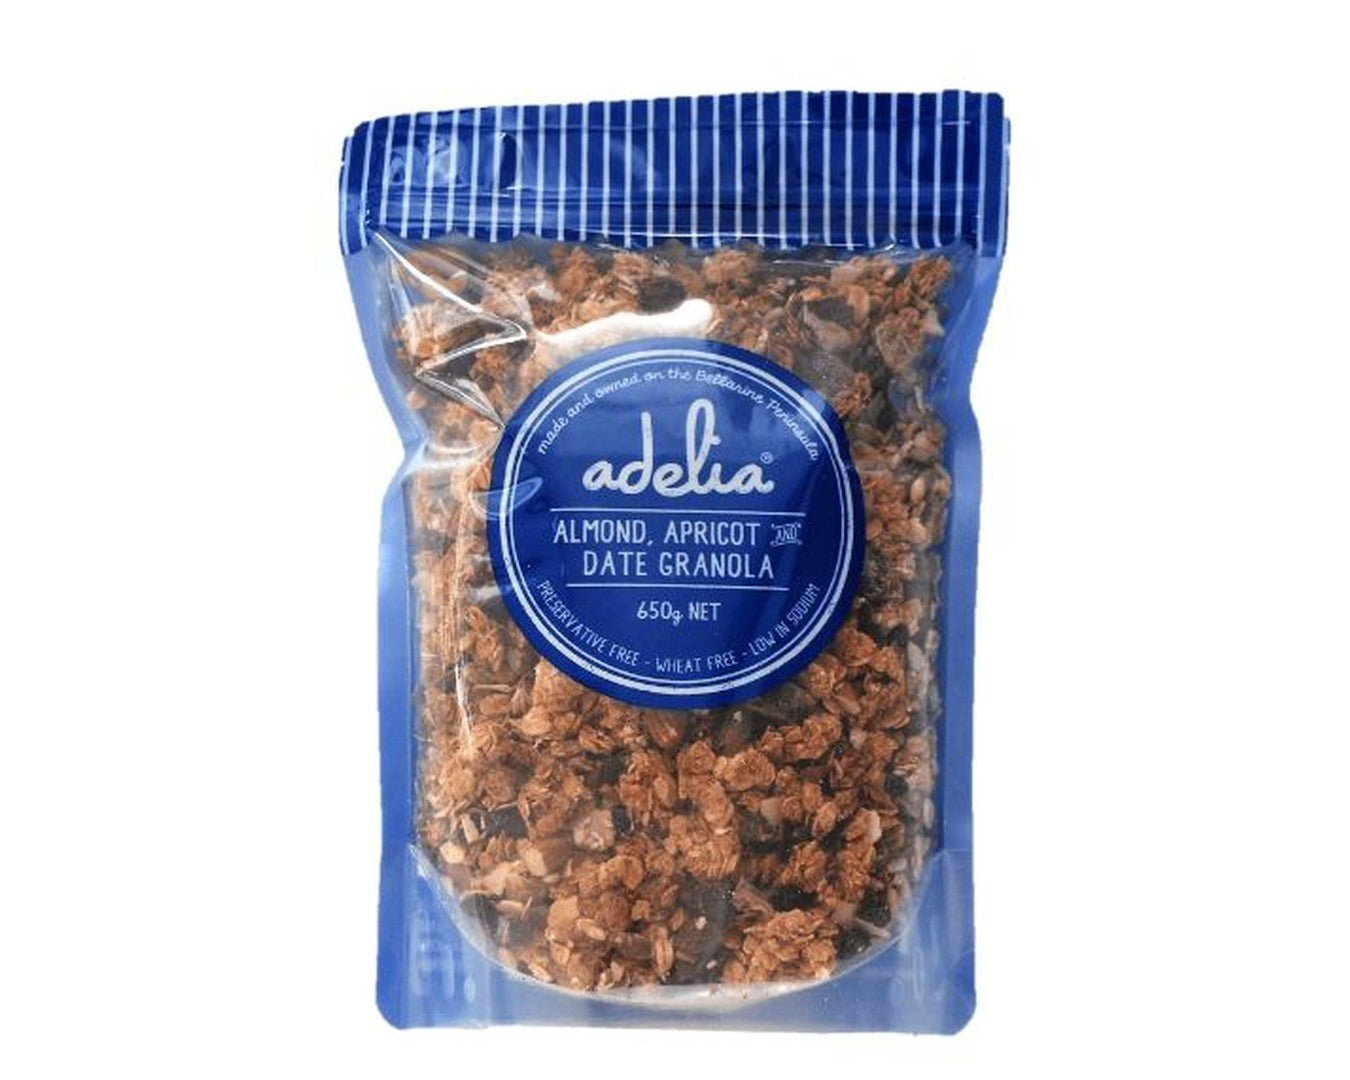 Adelia Almond Apricot Date Granola 650g-Cereal-The Local Basket